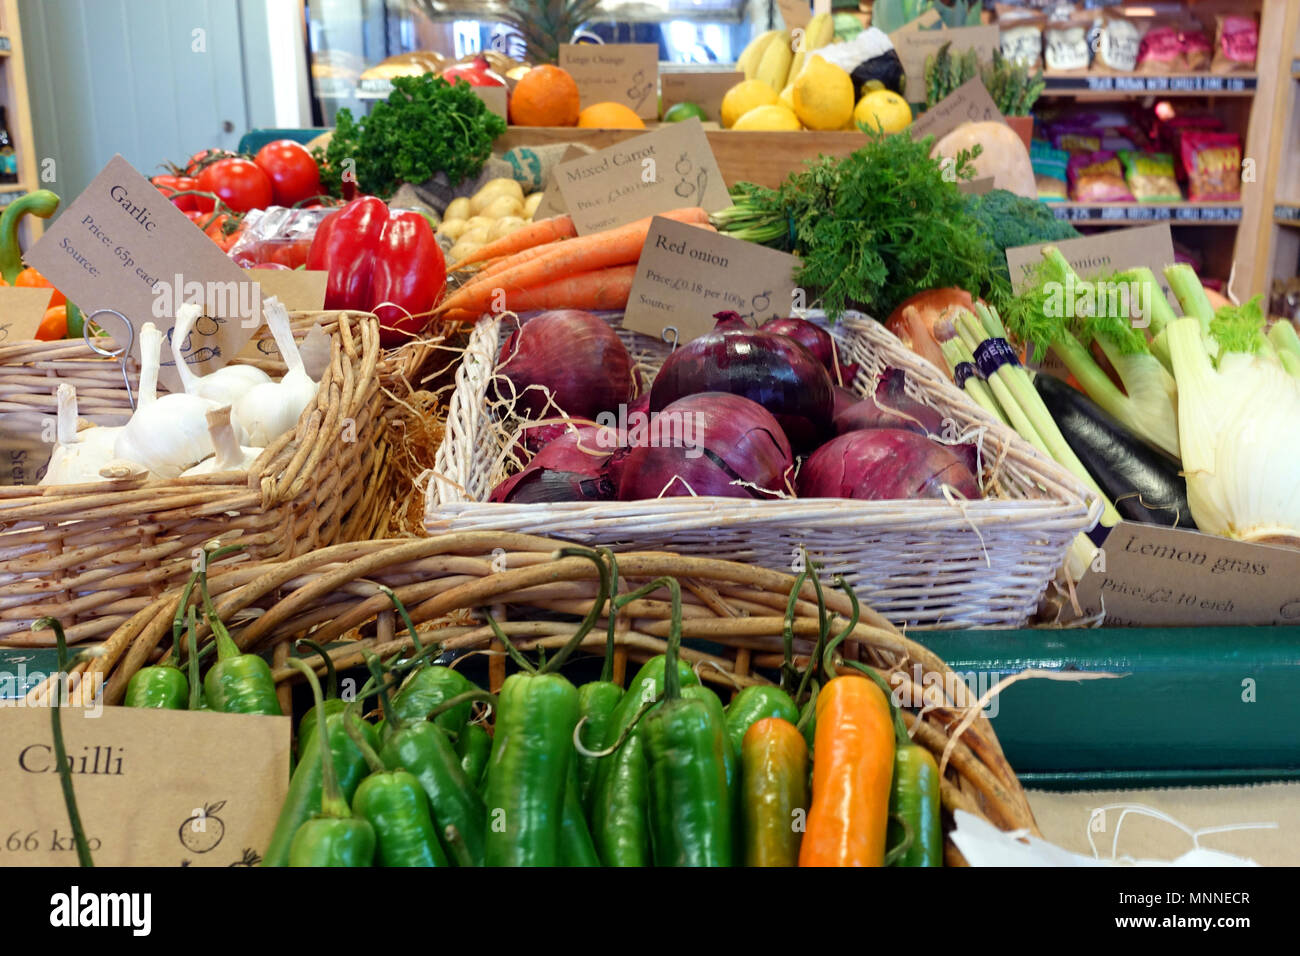 Brightly coloured selection of healthy organic vegetables in wicker baskets, including chilli, garlic, red onion,pepper, tomato and carrot. Stock Photo